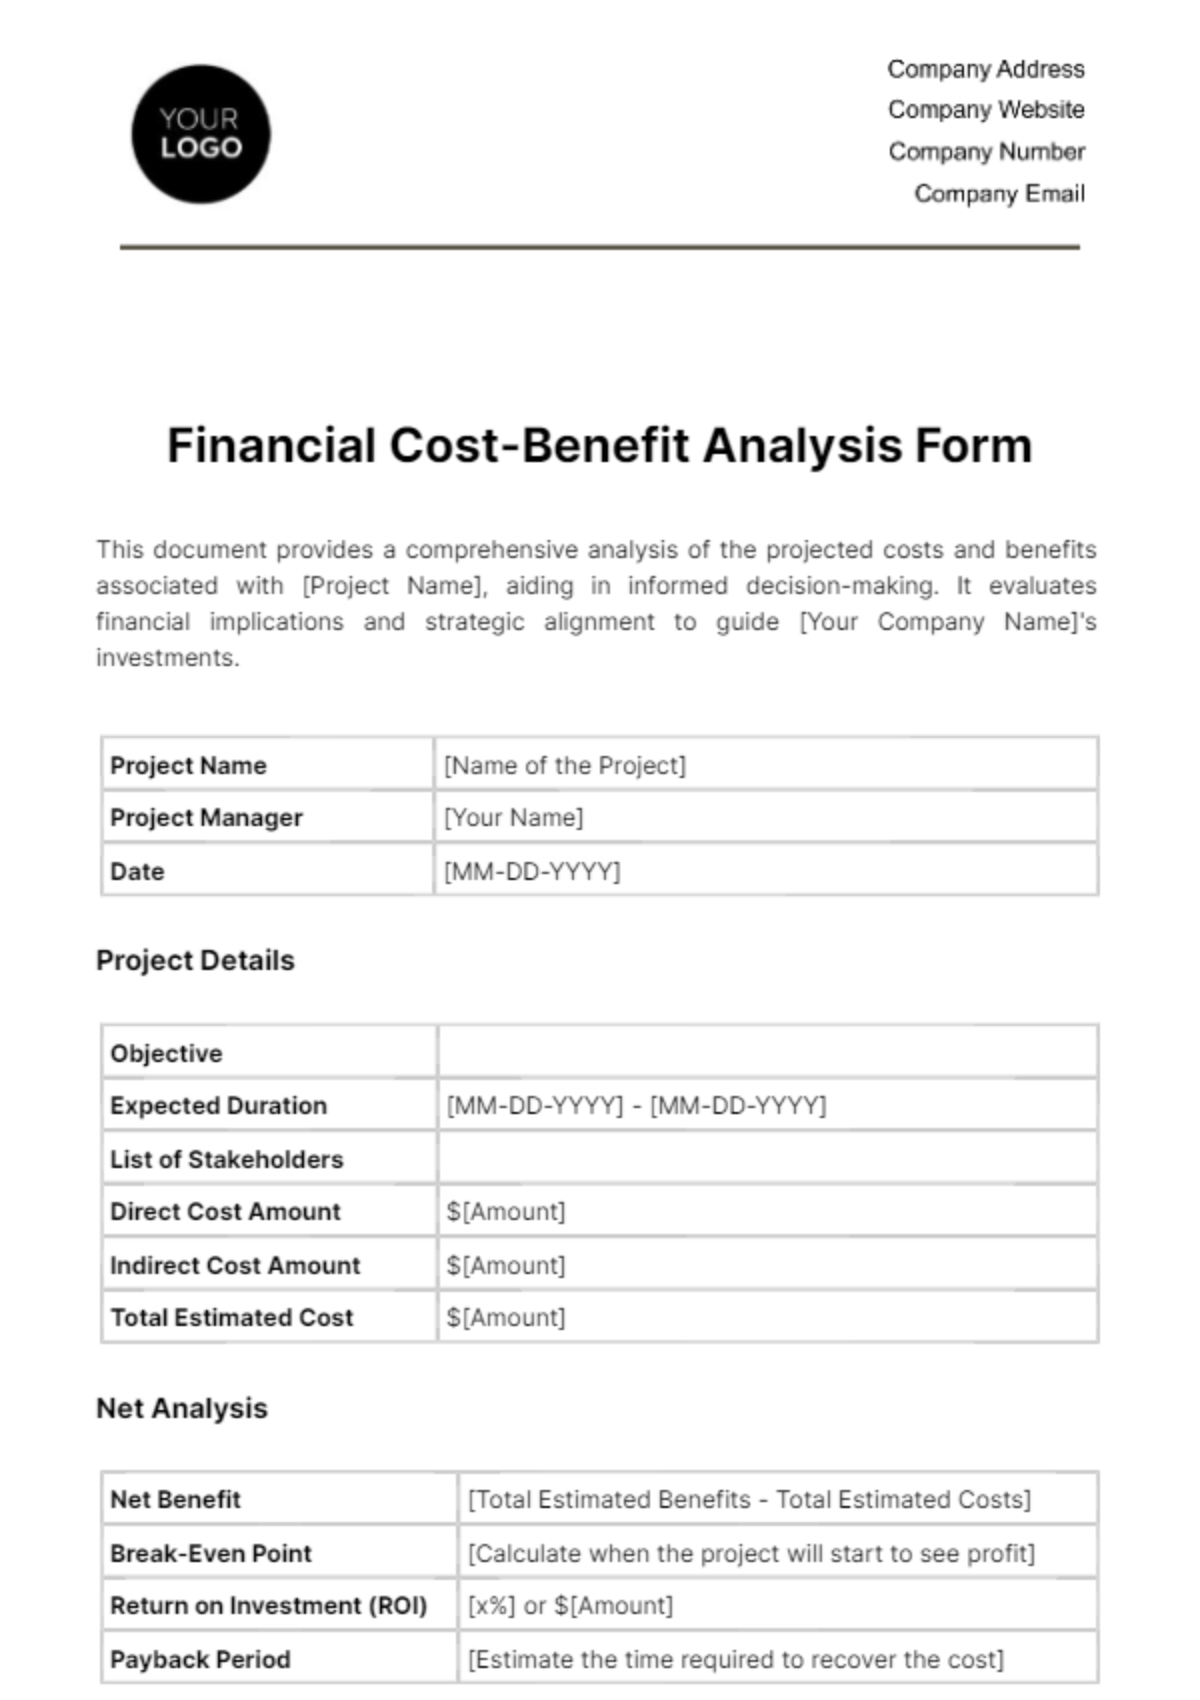 Financial Cost-Benefit Analysis Form Template